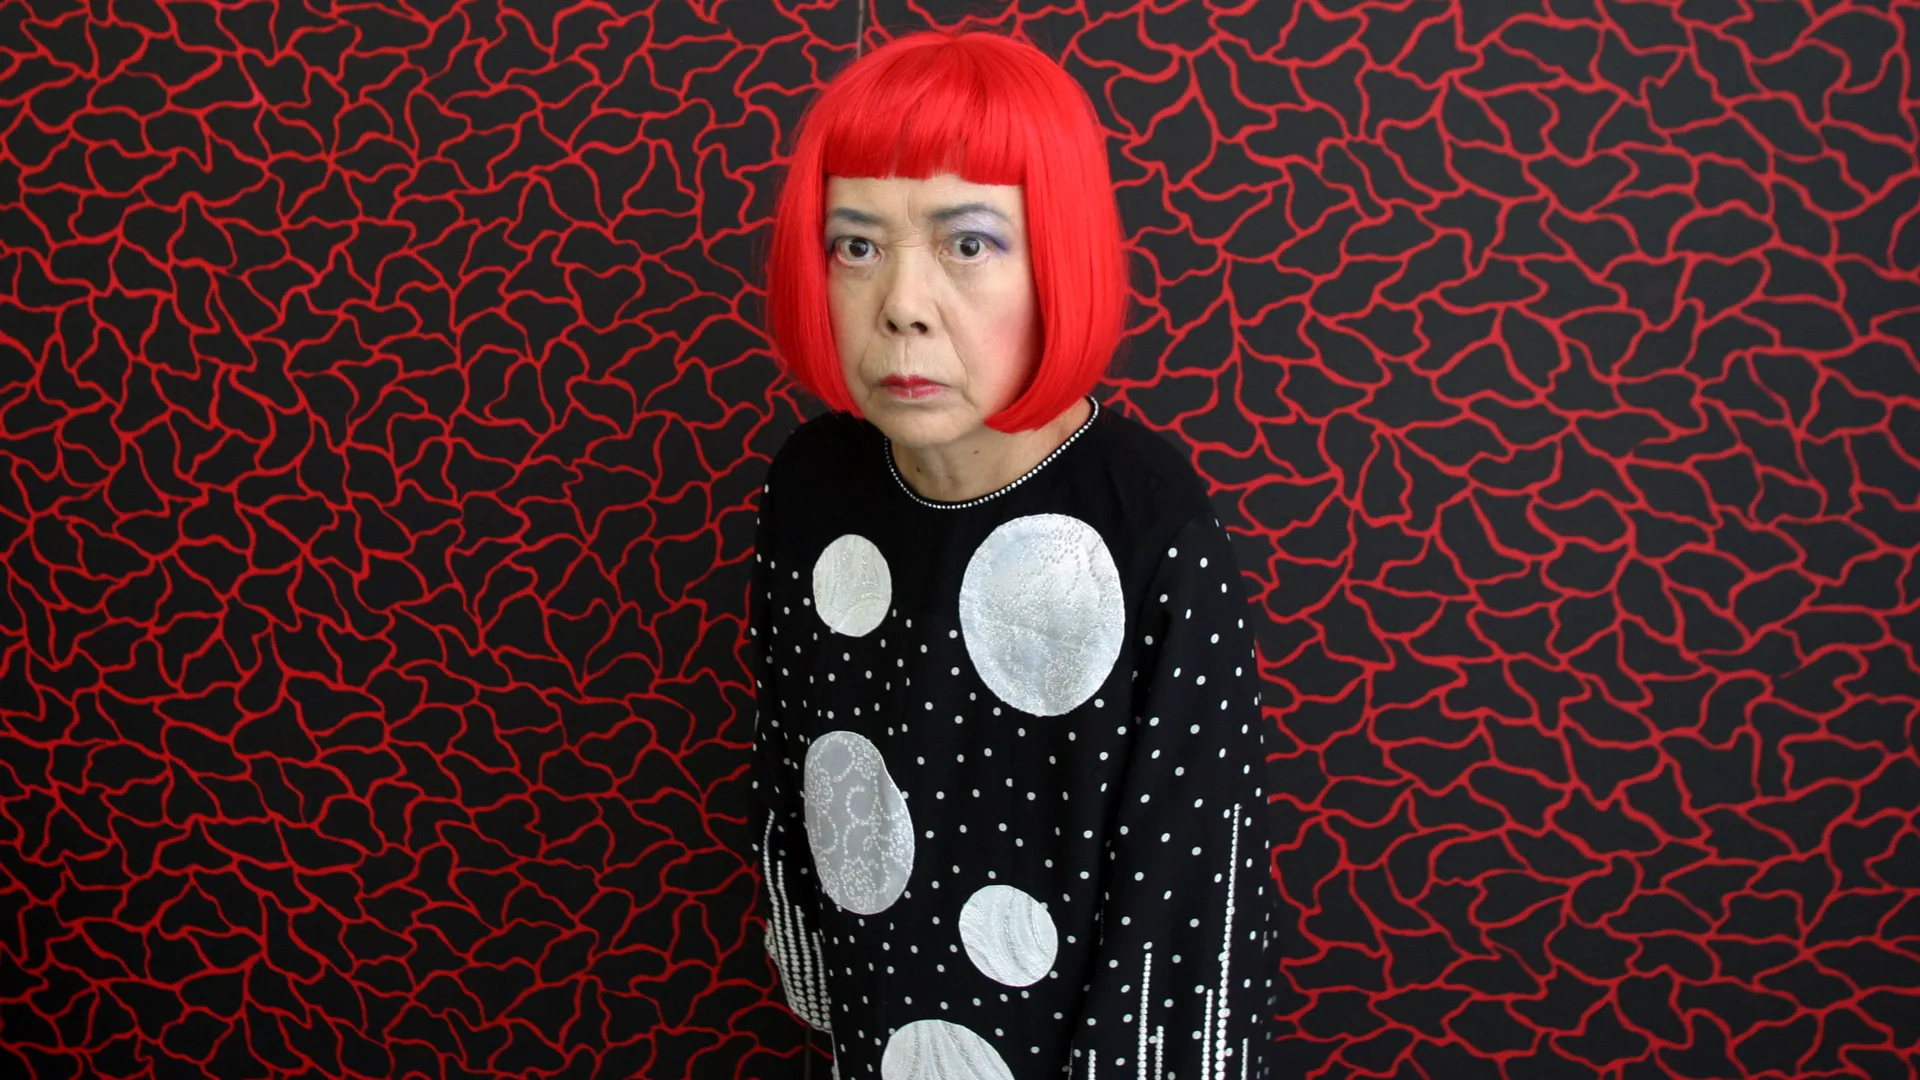 A photograph of Yayoi Kusama with her red wig and black and white spotted top against a red and black lined odd shape background